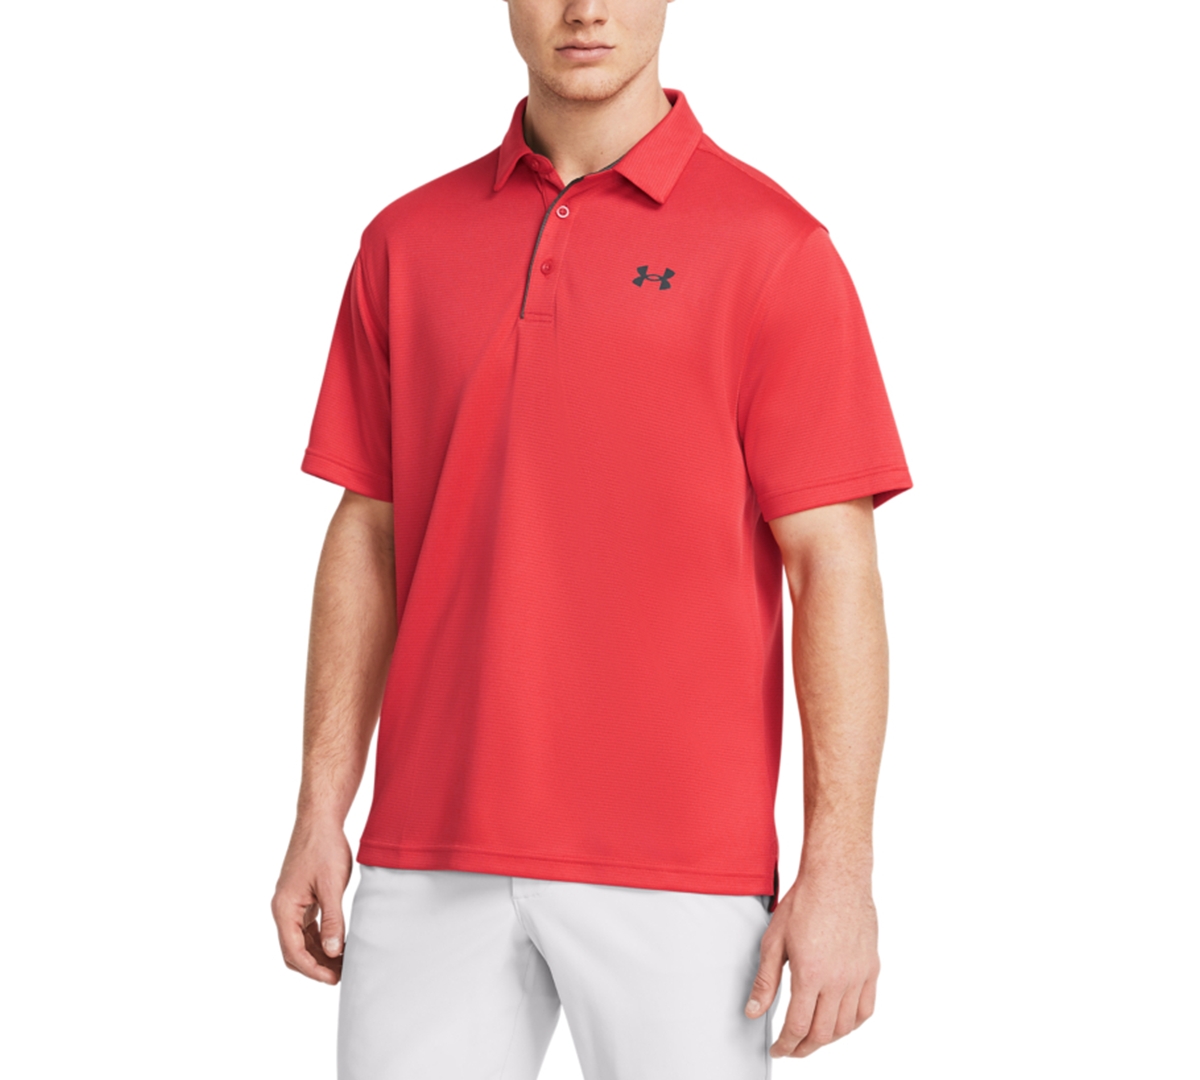 Under Armour Men's Tech Polo T-shirt In Red Solstice